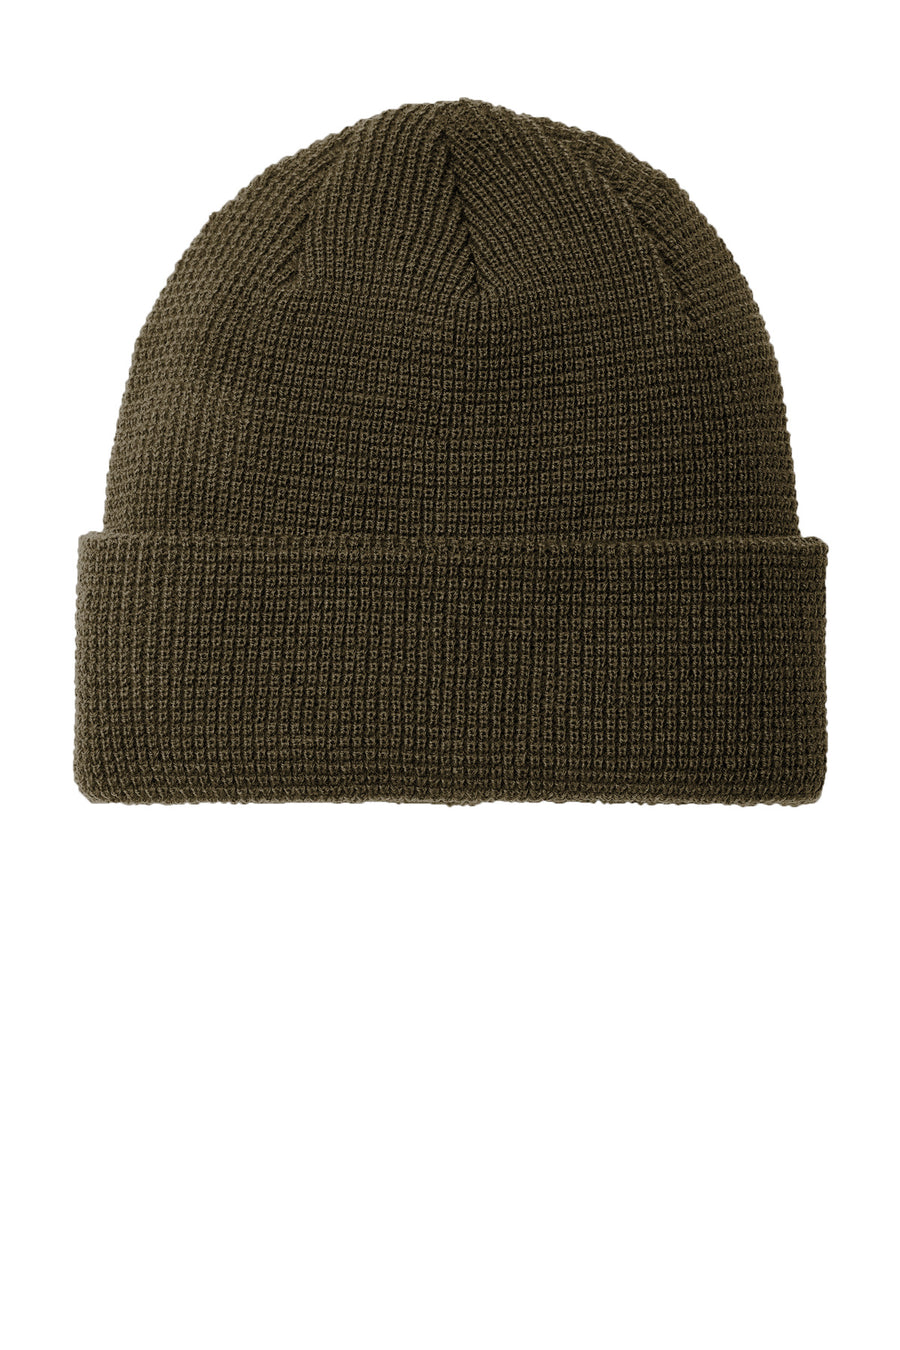 Port Authority¬Æ Thermal Knit Cuffed Beanie C955